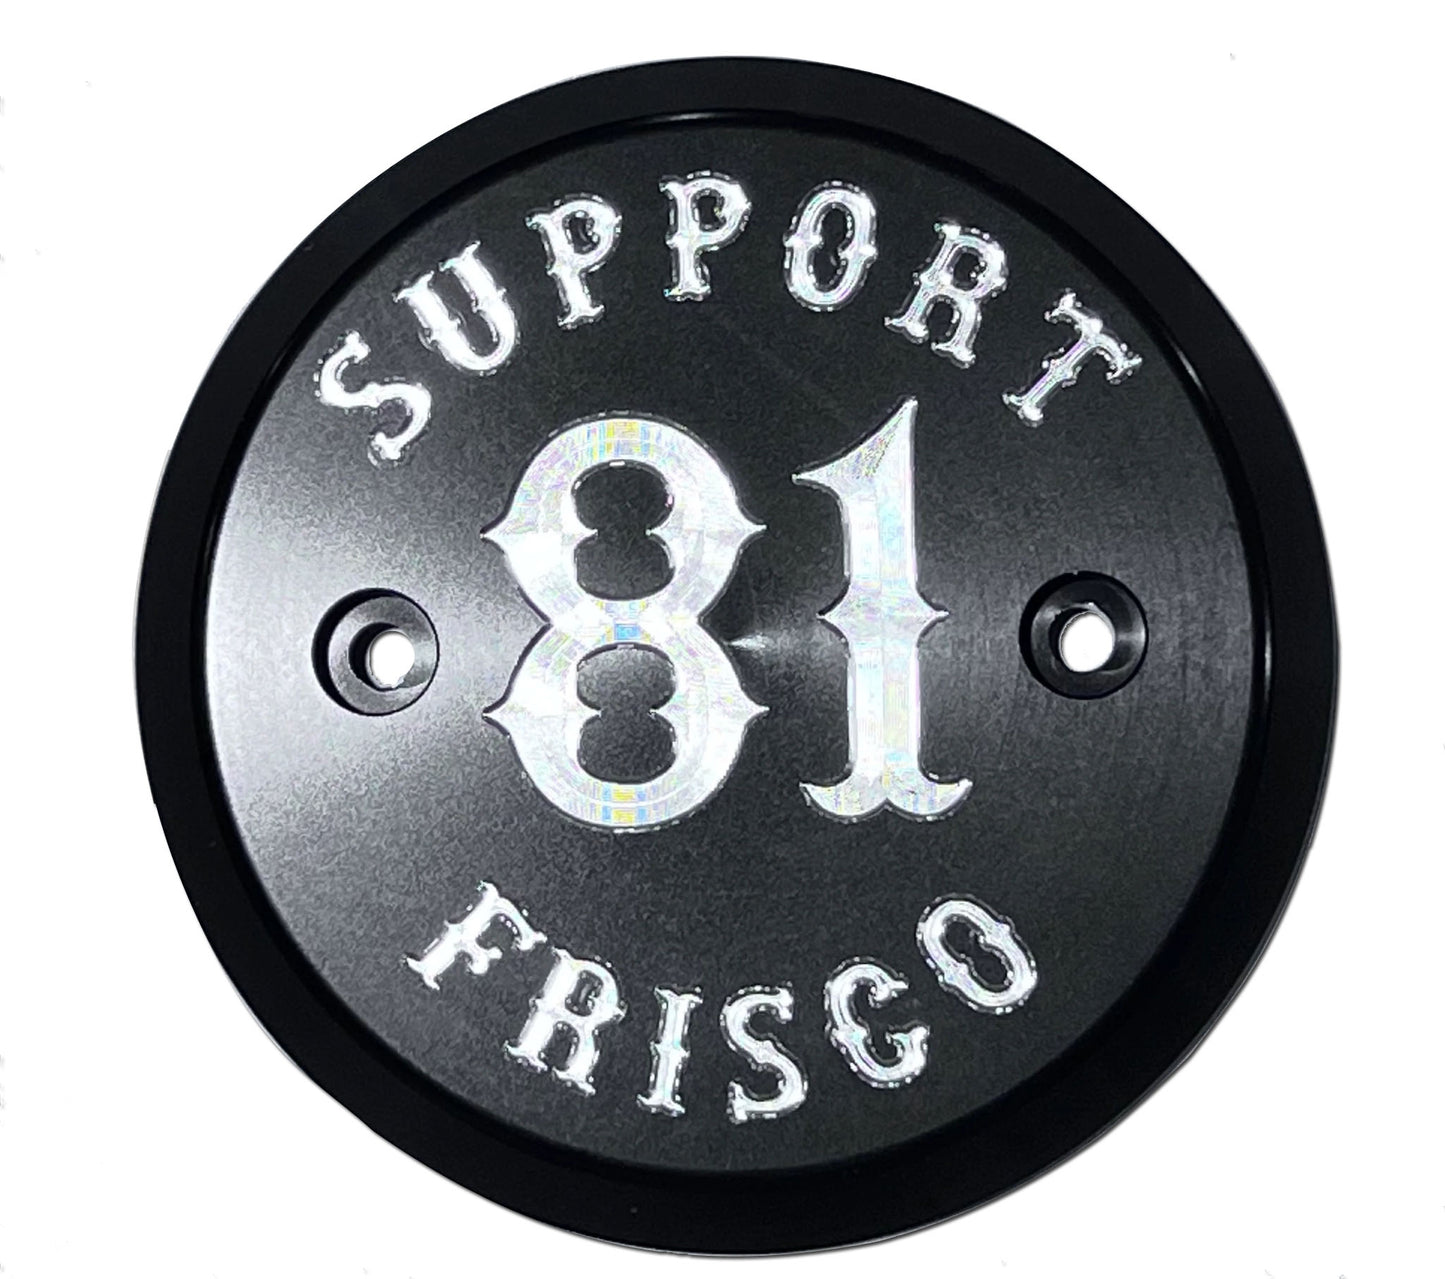 Points Cover - Support 81 Frisco